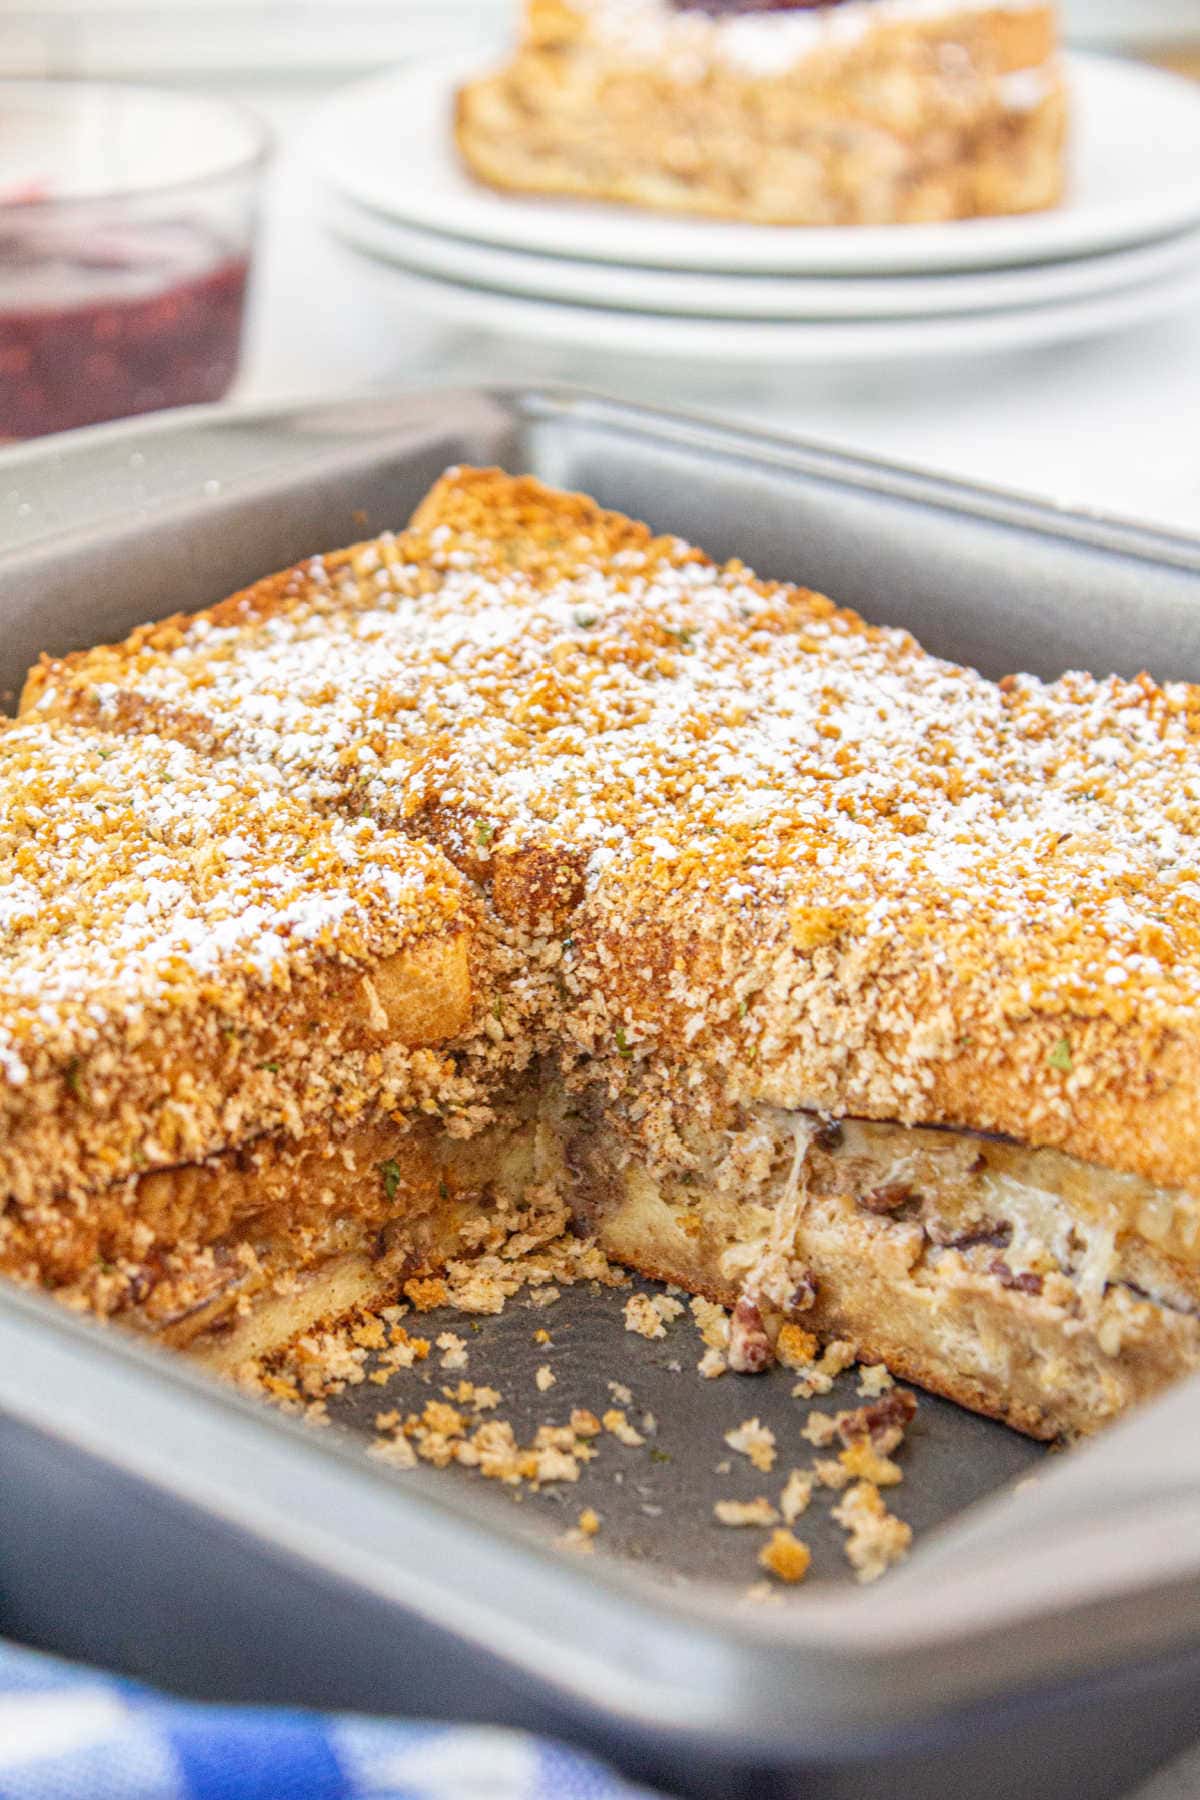 Monte Cristo casserole in the pan with a serving removed.